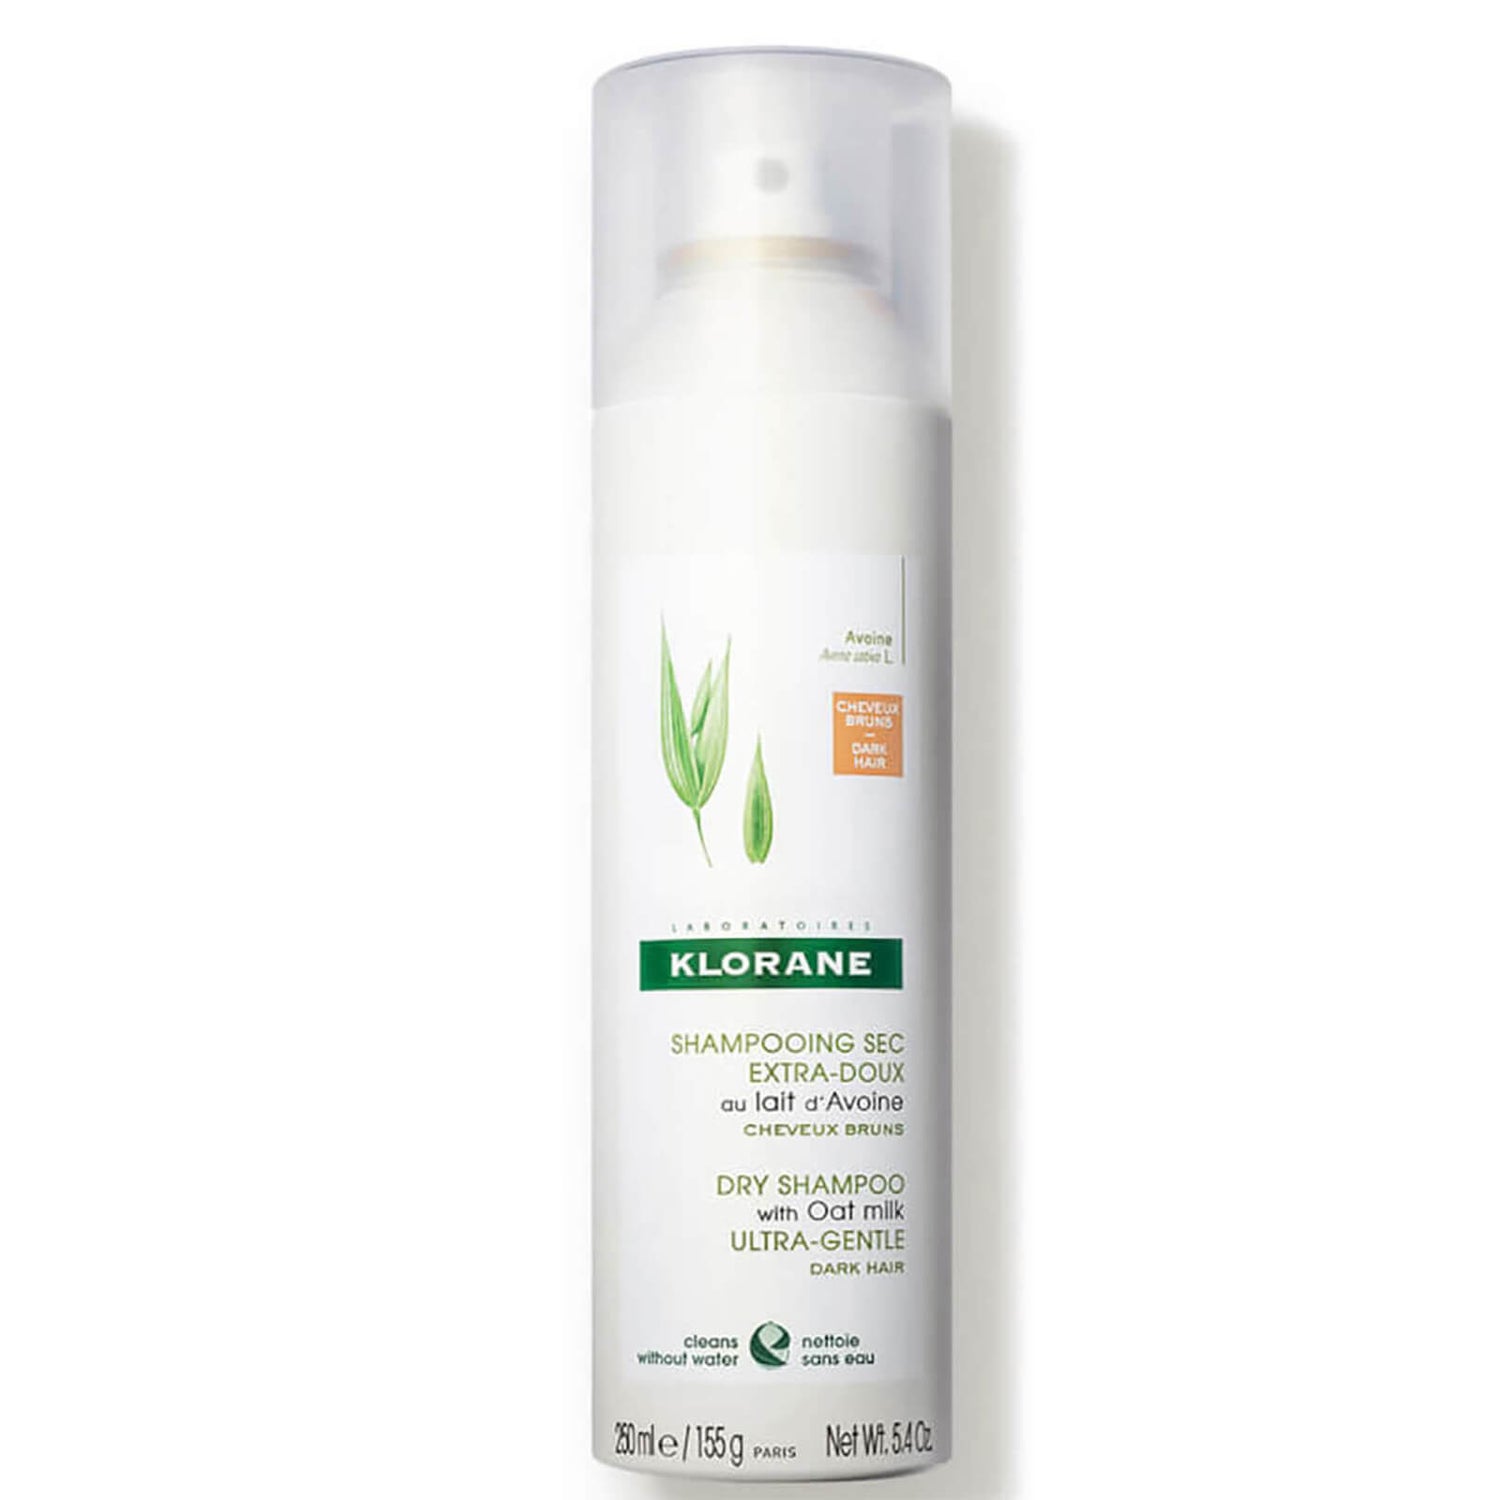 Klorane Dry Shampoo with Oat Milk and Natural Tint- for Dark Hair 5.4 oz